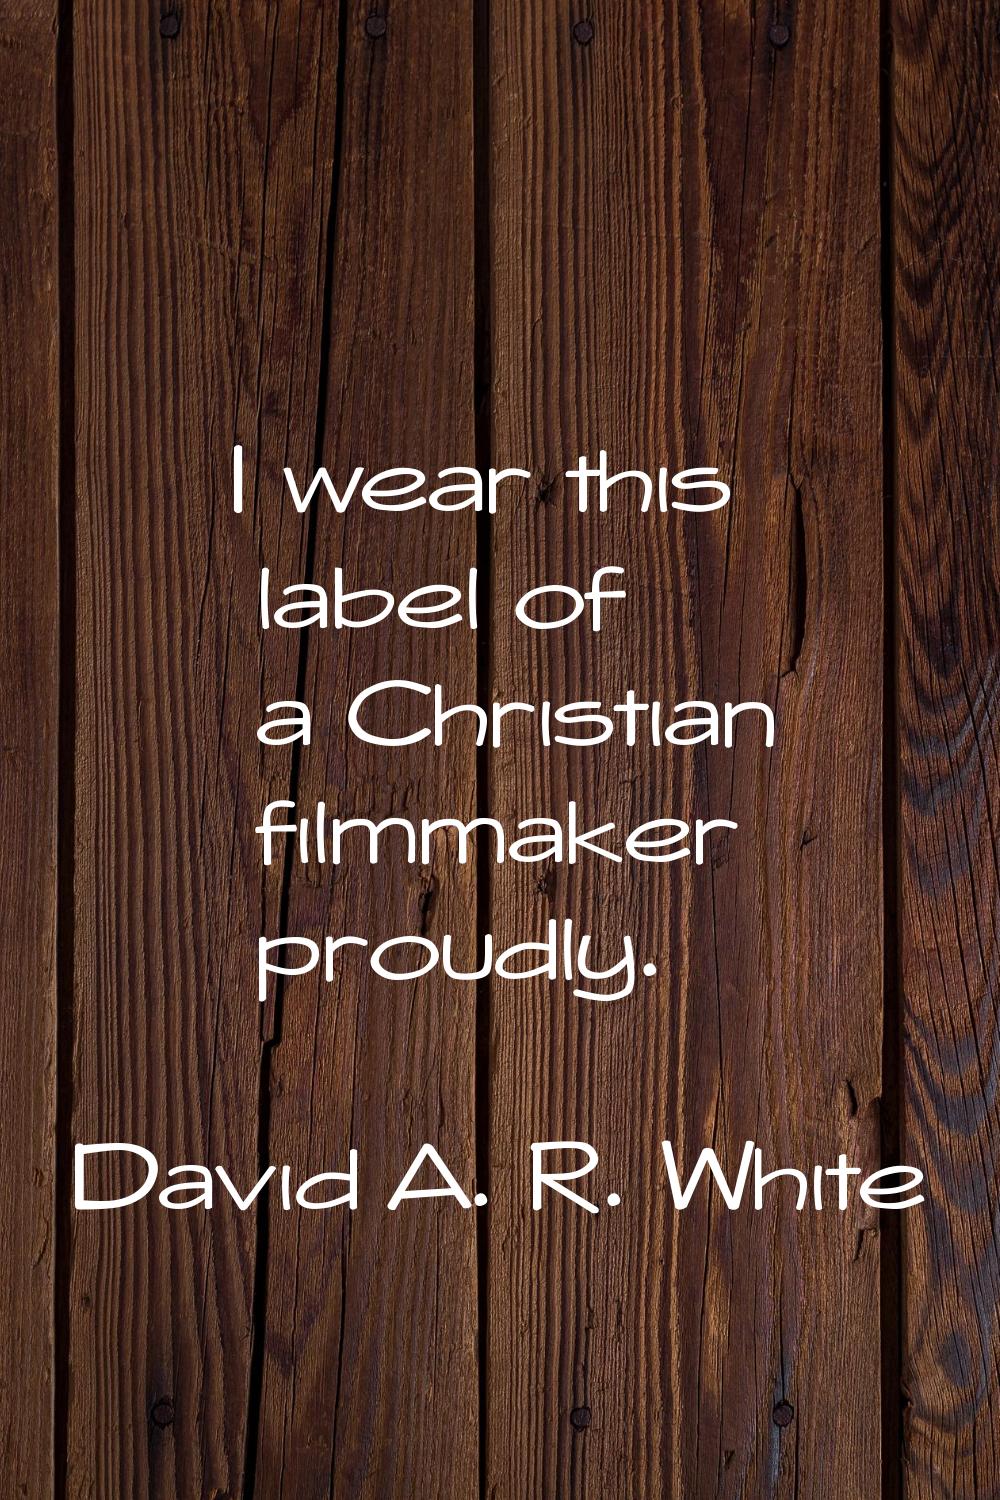 I wear this label of a Christian filmmaker proudly.